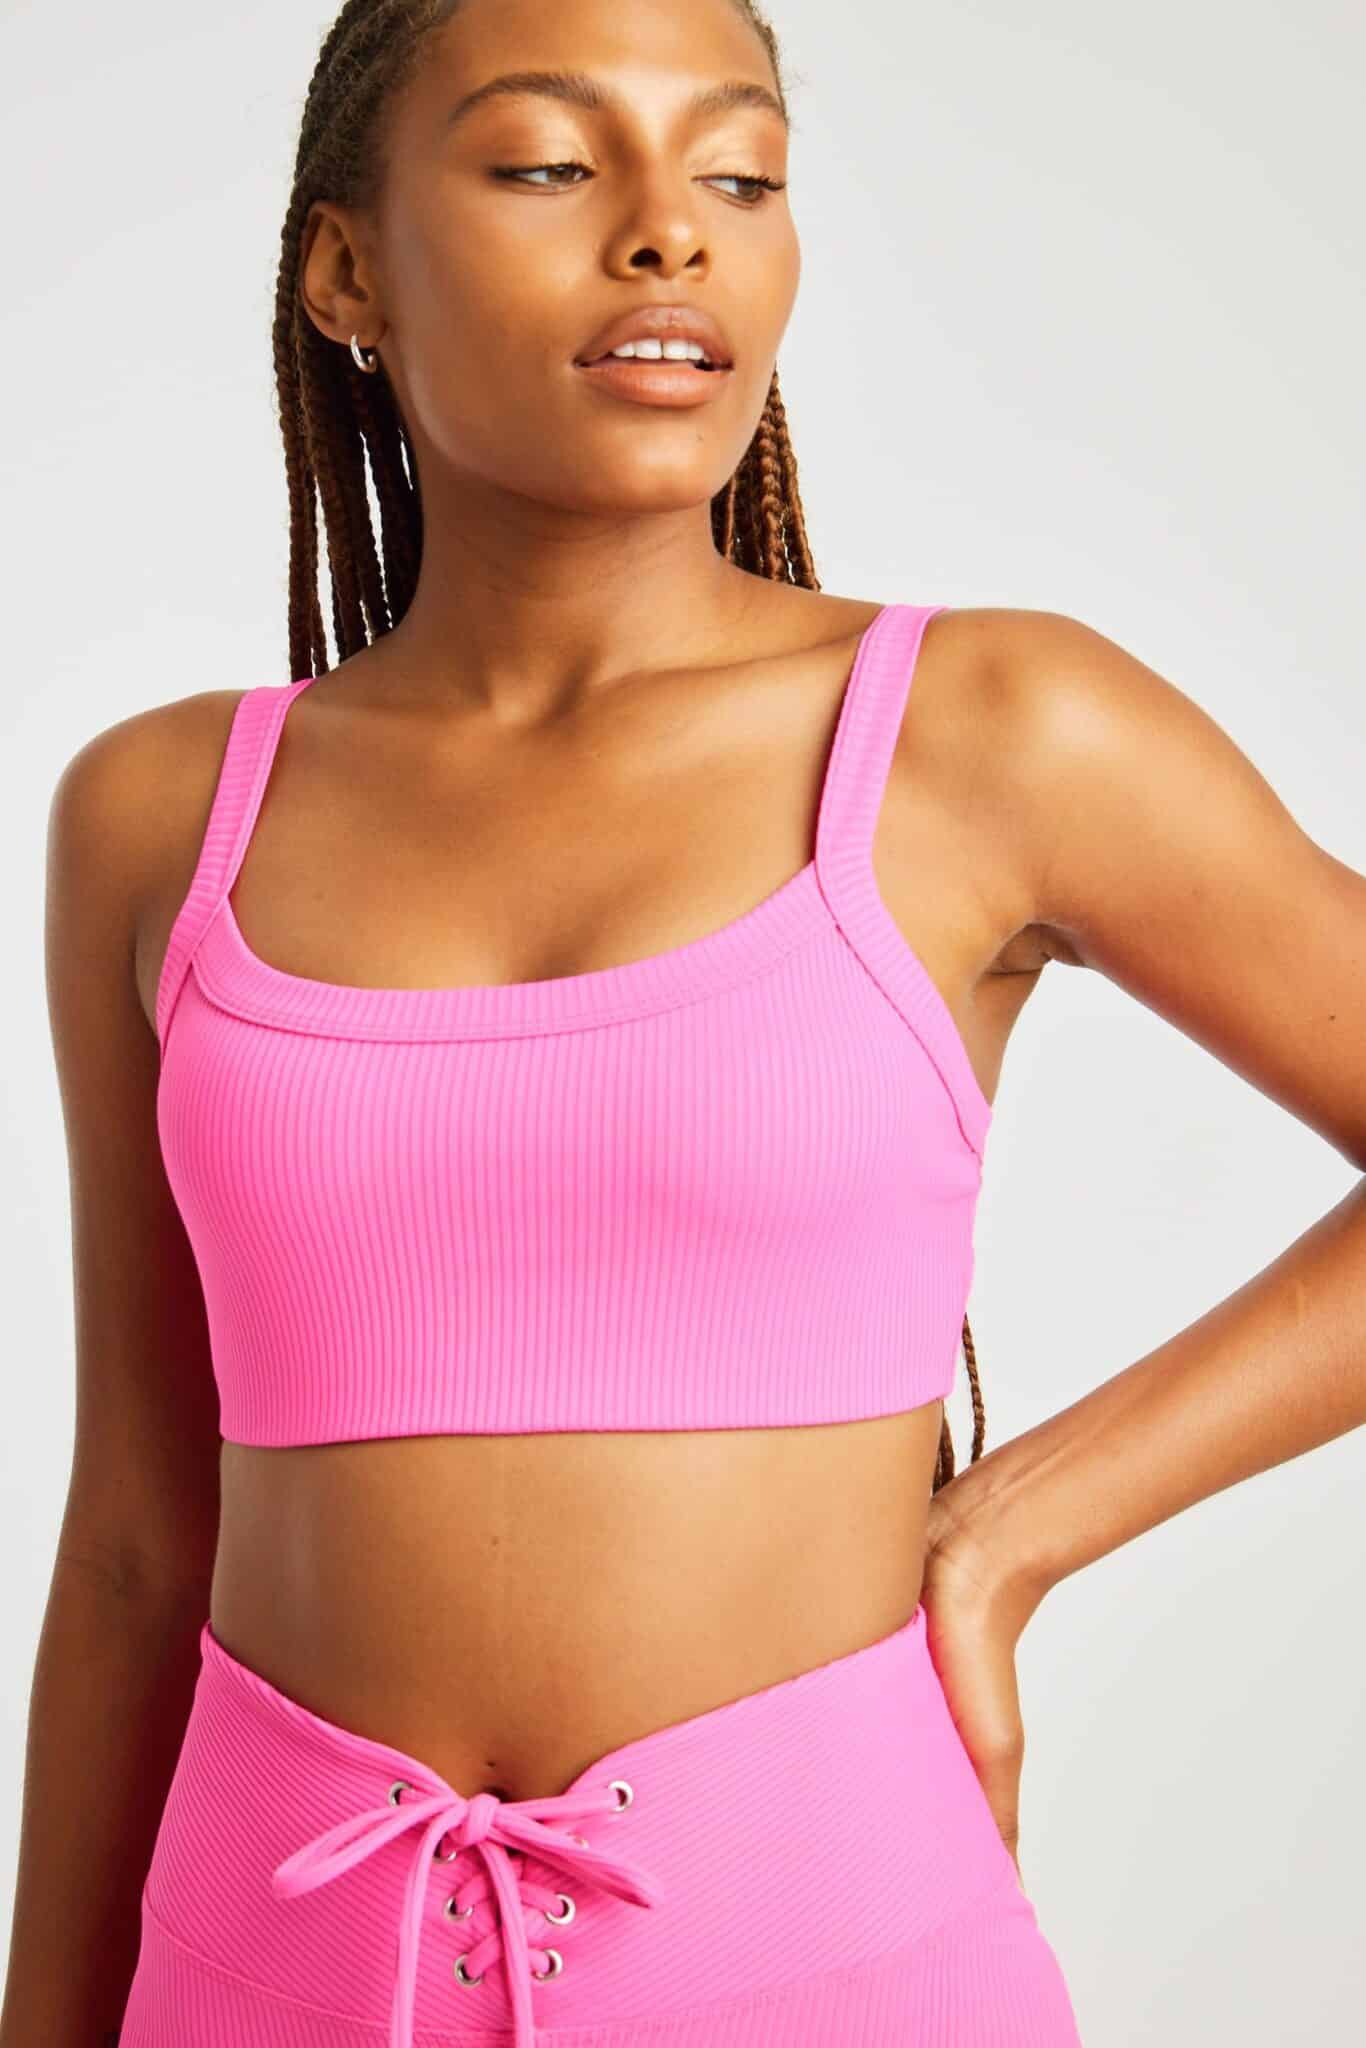 https://shes-active.com/wp-content/uploads/2022/08/RIBBED-BRALETTE-PINK-1-scaled.jpeg